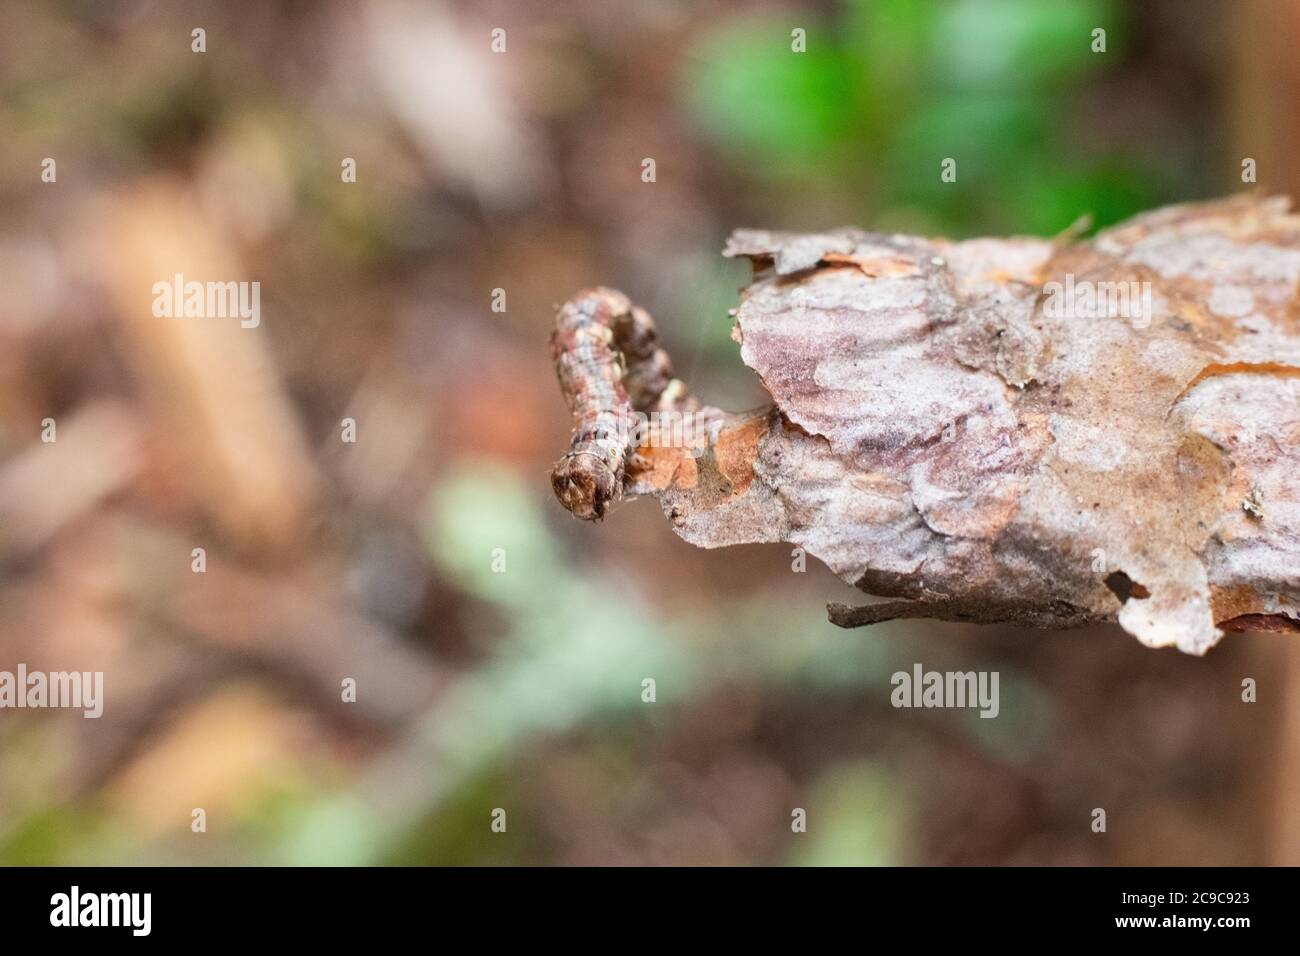 Geometer moth caterpillar on small branch. Mimicry of insects. Stock Photo